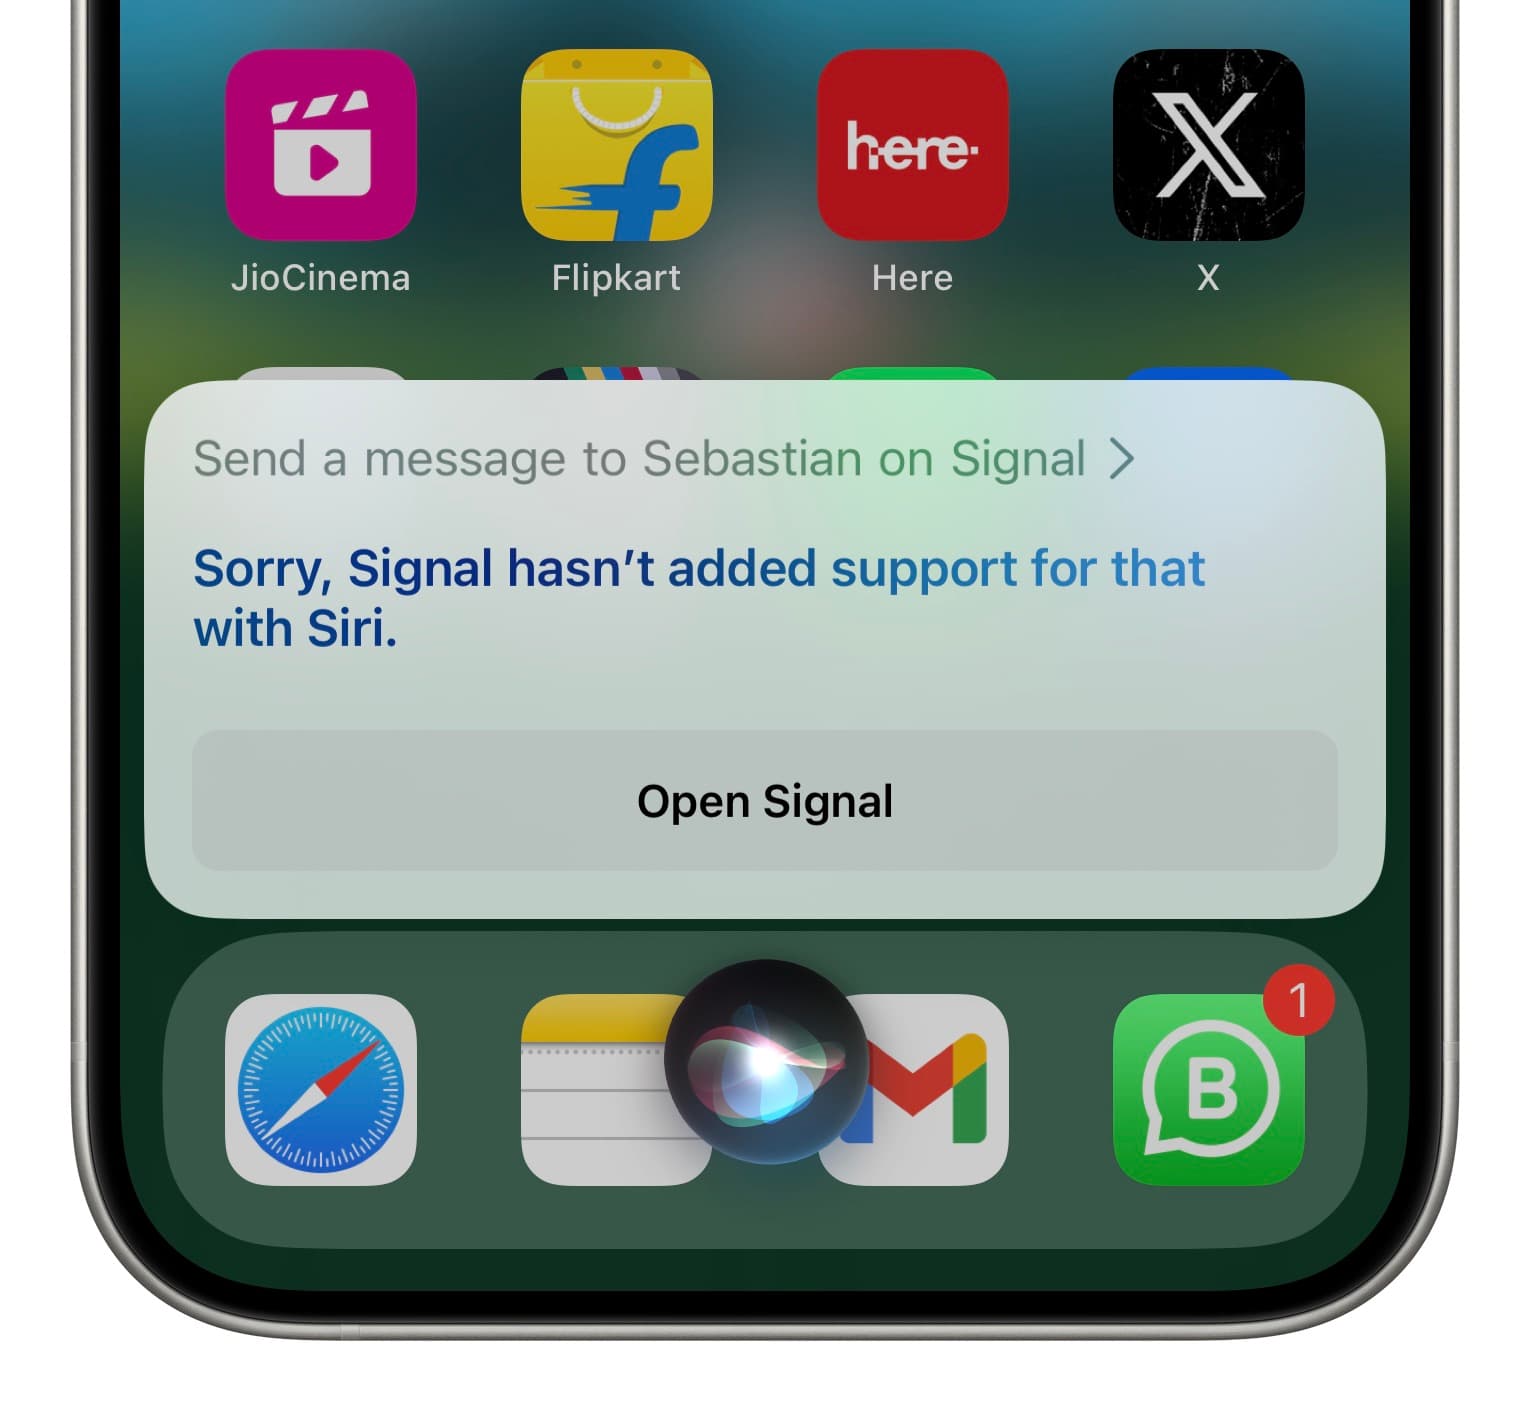 App not added Siri support